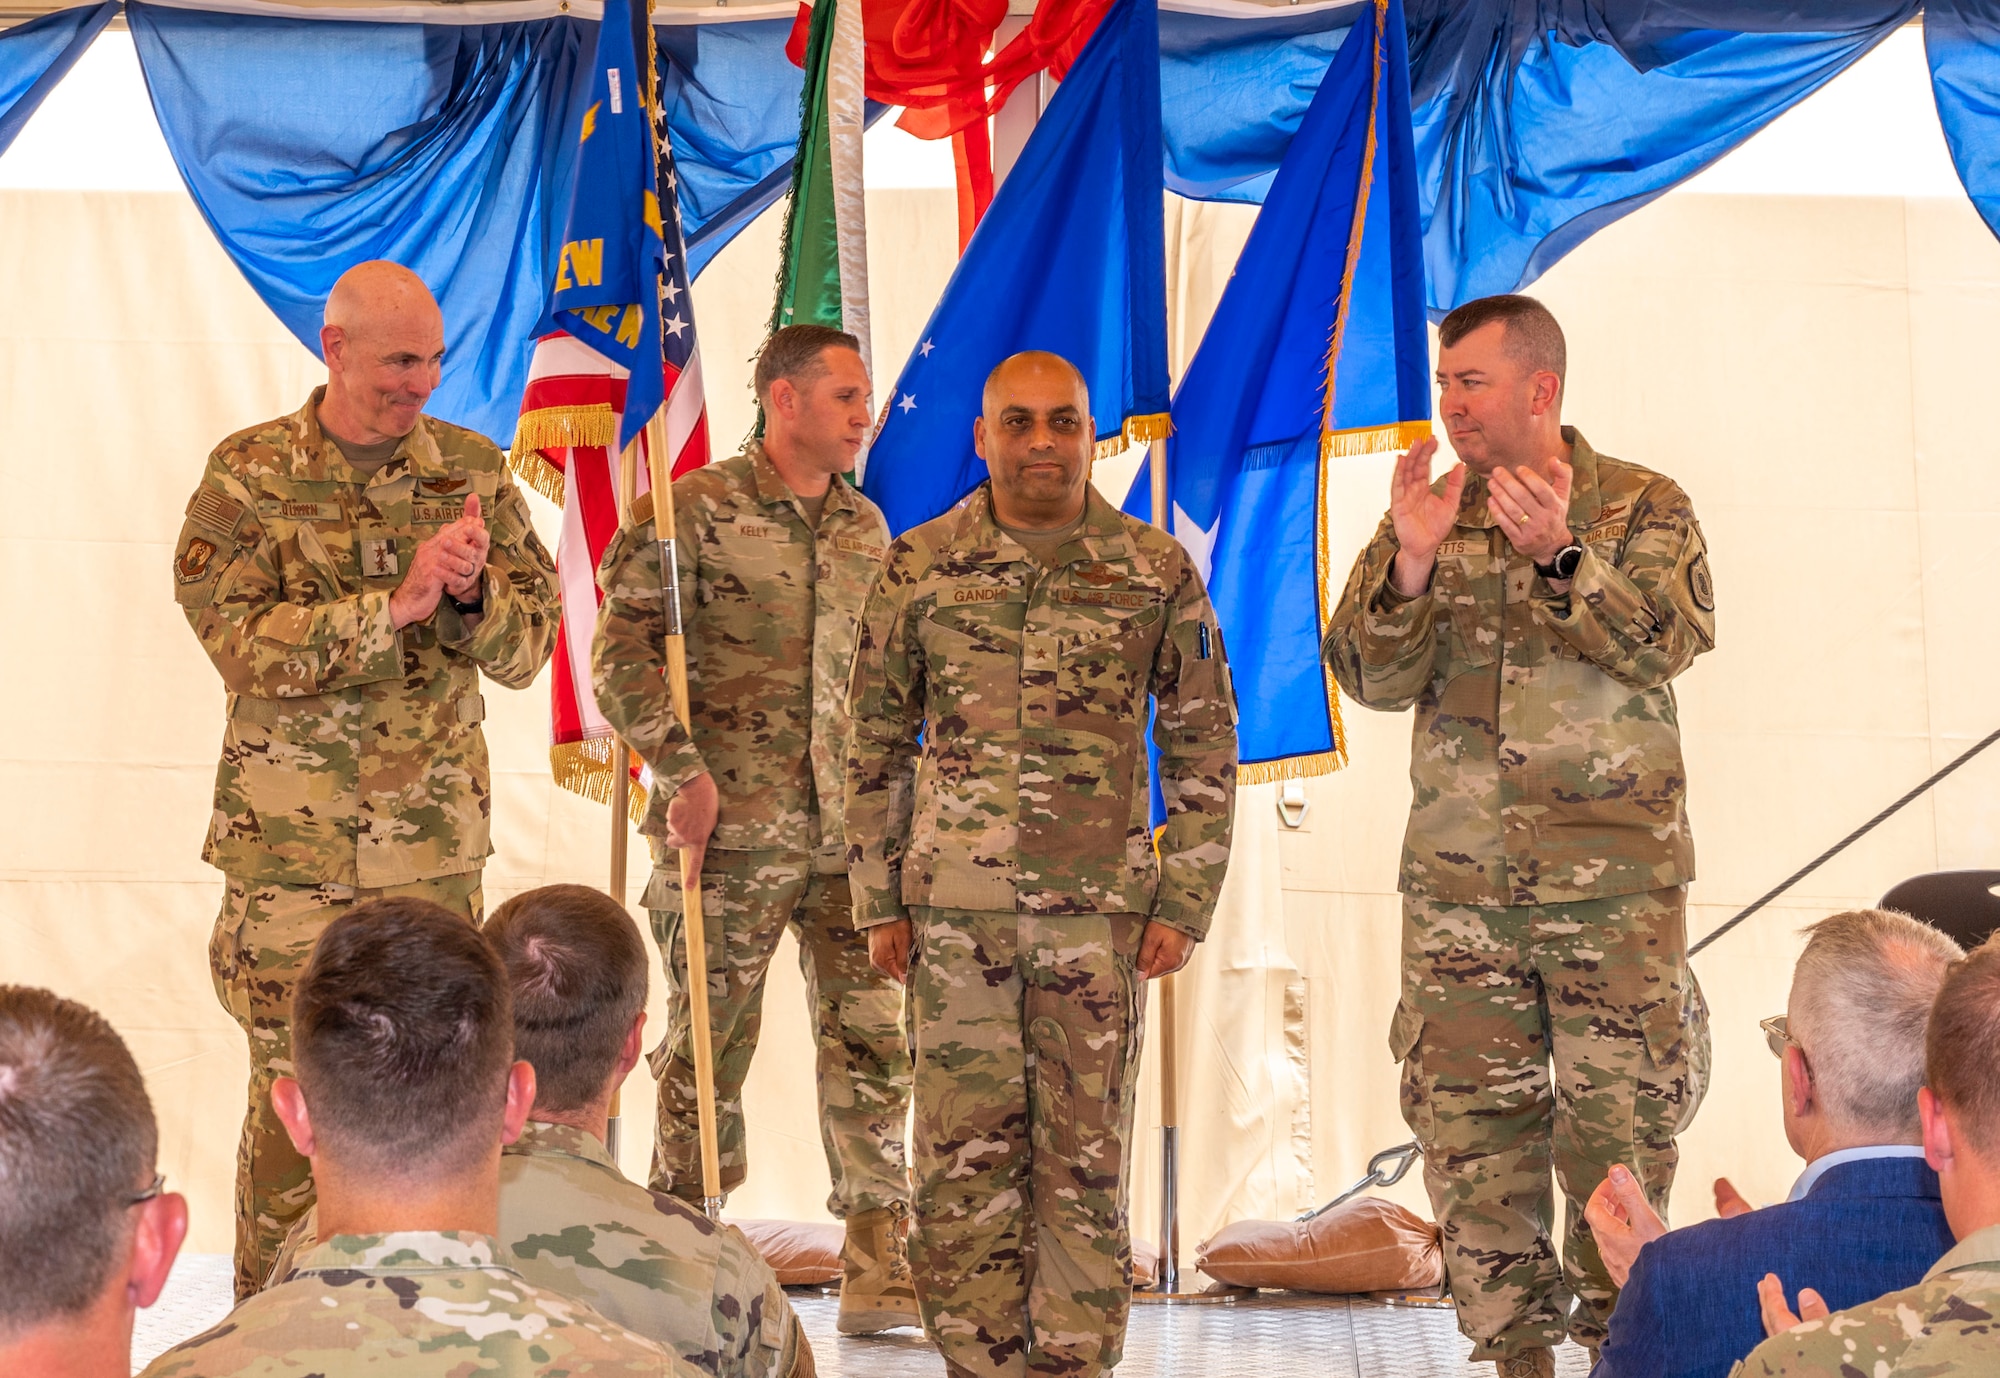 U.S. Air Force Brig. Gen. Akshai Gandhi, center, is applauded after assuming command of the 378th Air Expeditionary Wing from Maj. Gen. Clark Quinn, left, Ninth Air Force deputy commander, during a change of command ceremony at Prince Sultan Air Base, Kingdom of Saudi Arabia, May 18, 2023. During the ceremony, Brig. Gen. William Betts relinquished command of the 378th AEW to Gandhi. The tradition of change of command ceremonies are to allow service members to witness their new leader assume the responsibility and trust associated with the position of commander. (U.S. Air Force photo by Senior Airman Stephani Barge)